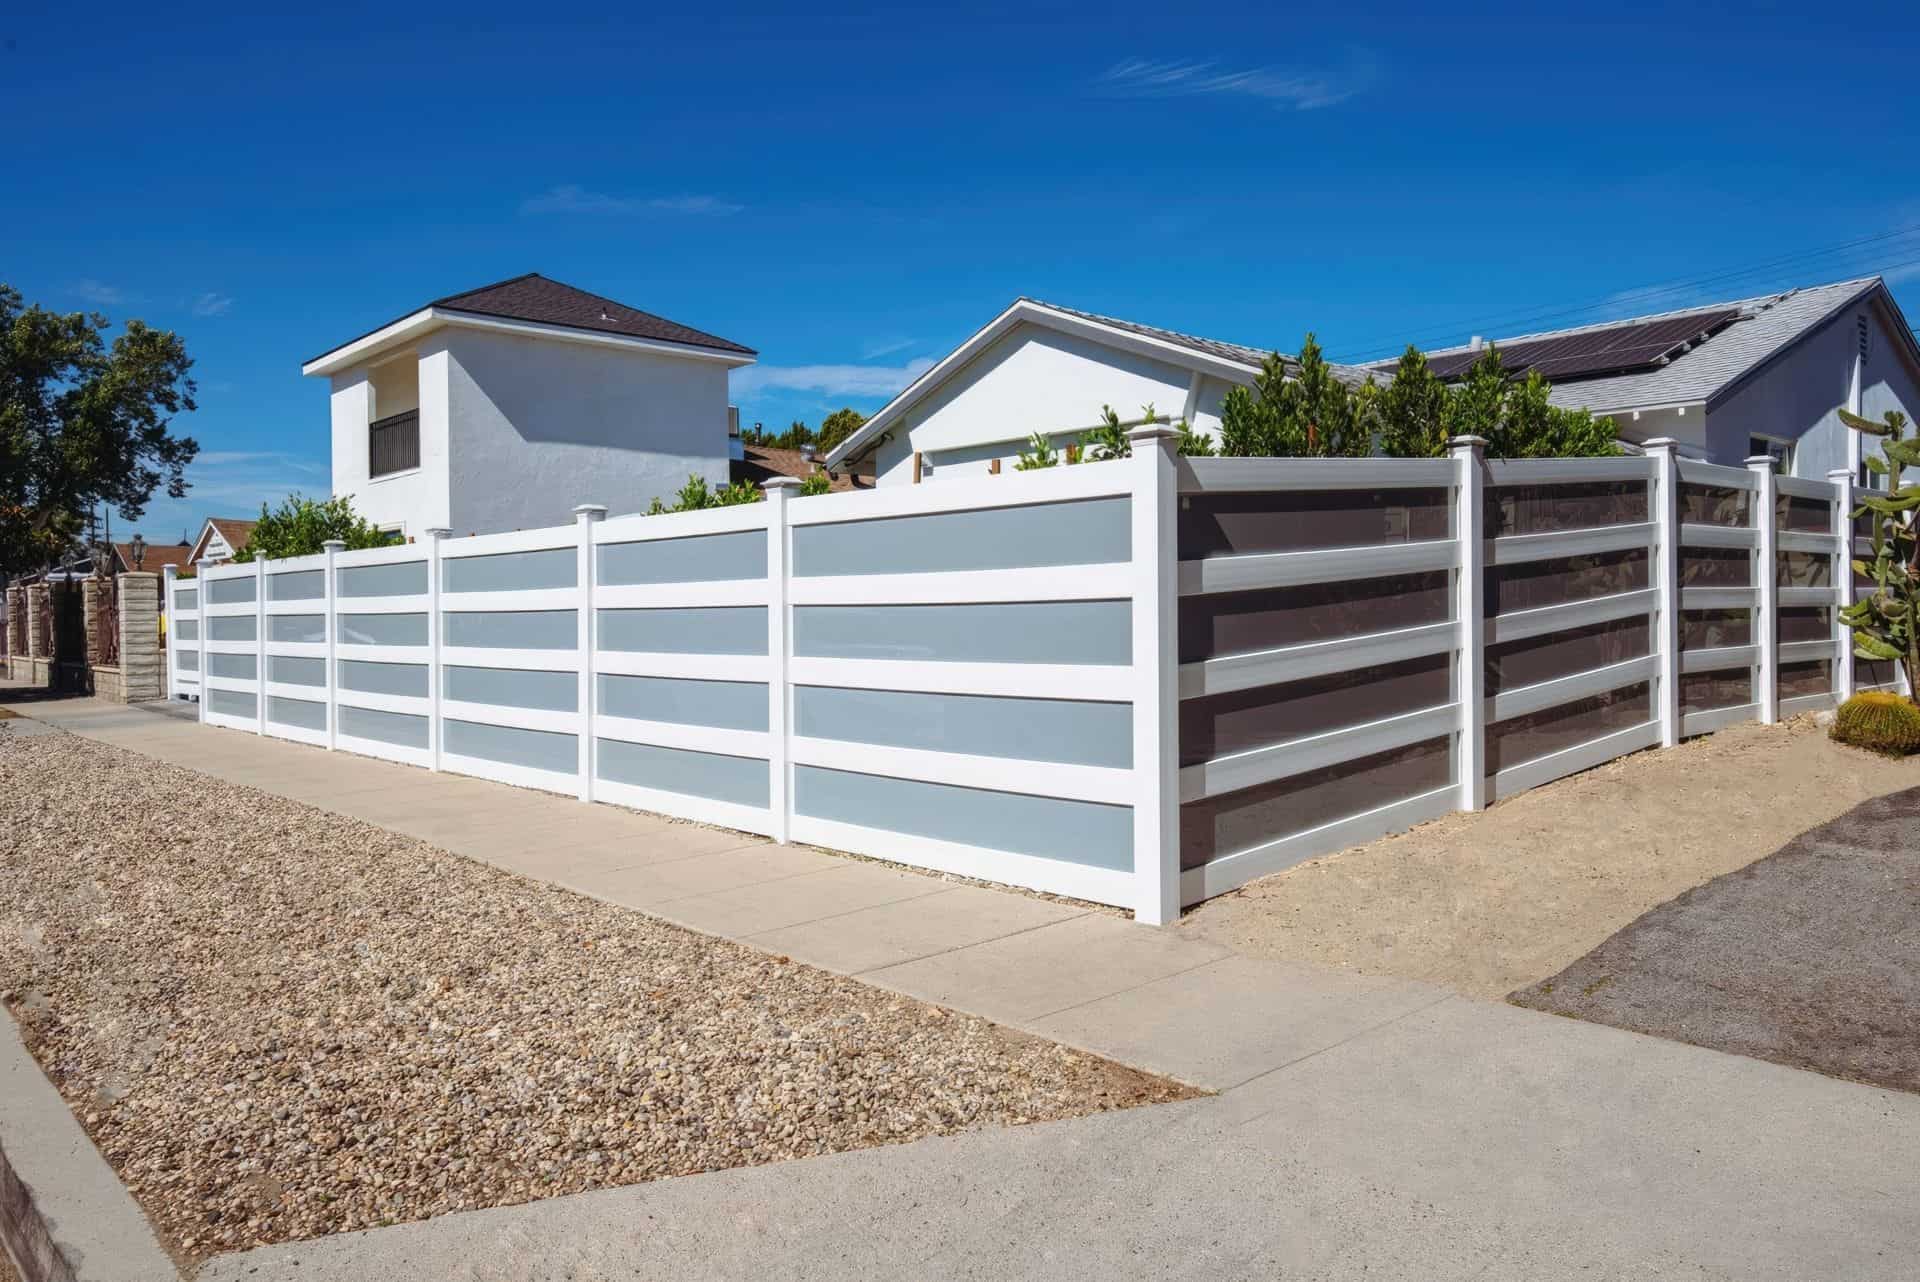 Vinyl & acrylic privacy fence by a concrete sidewalk, offering increased privacy with trees and houses in the background.